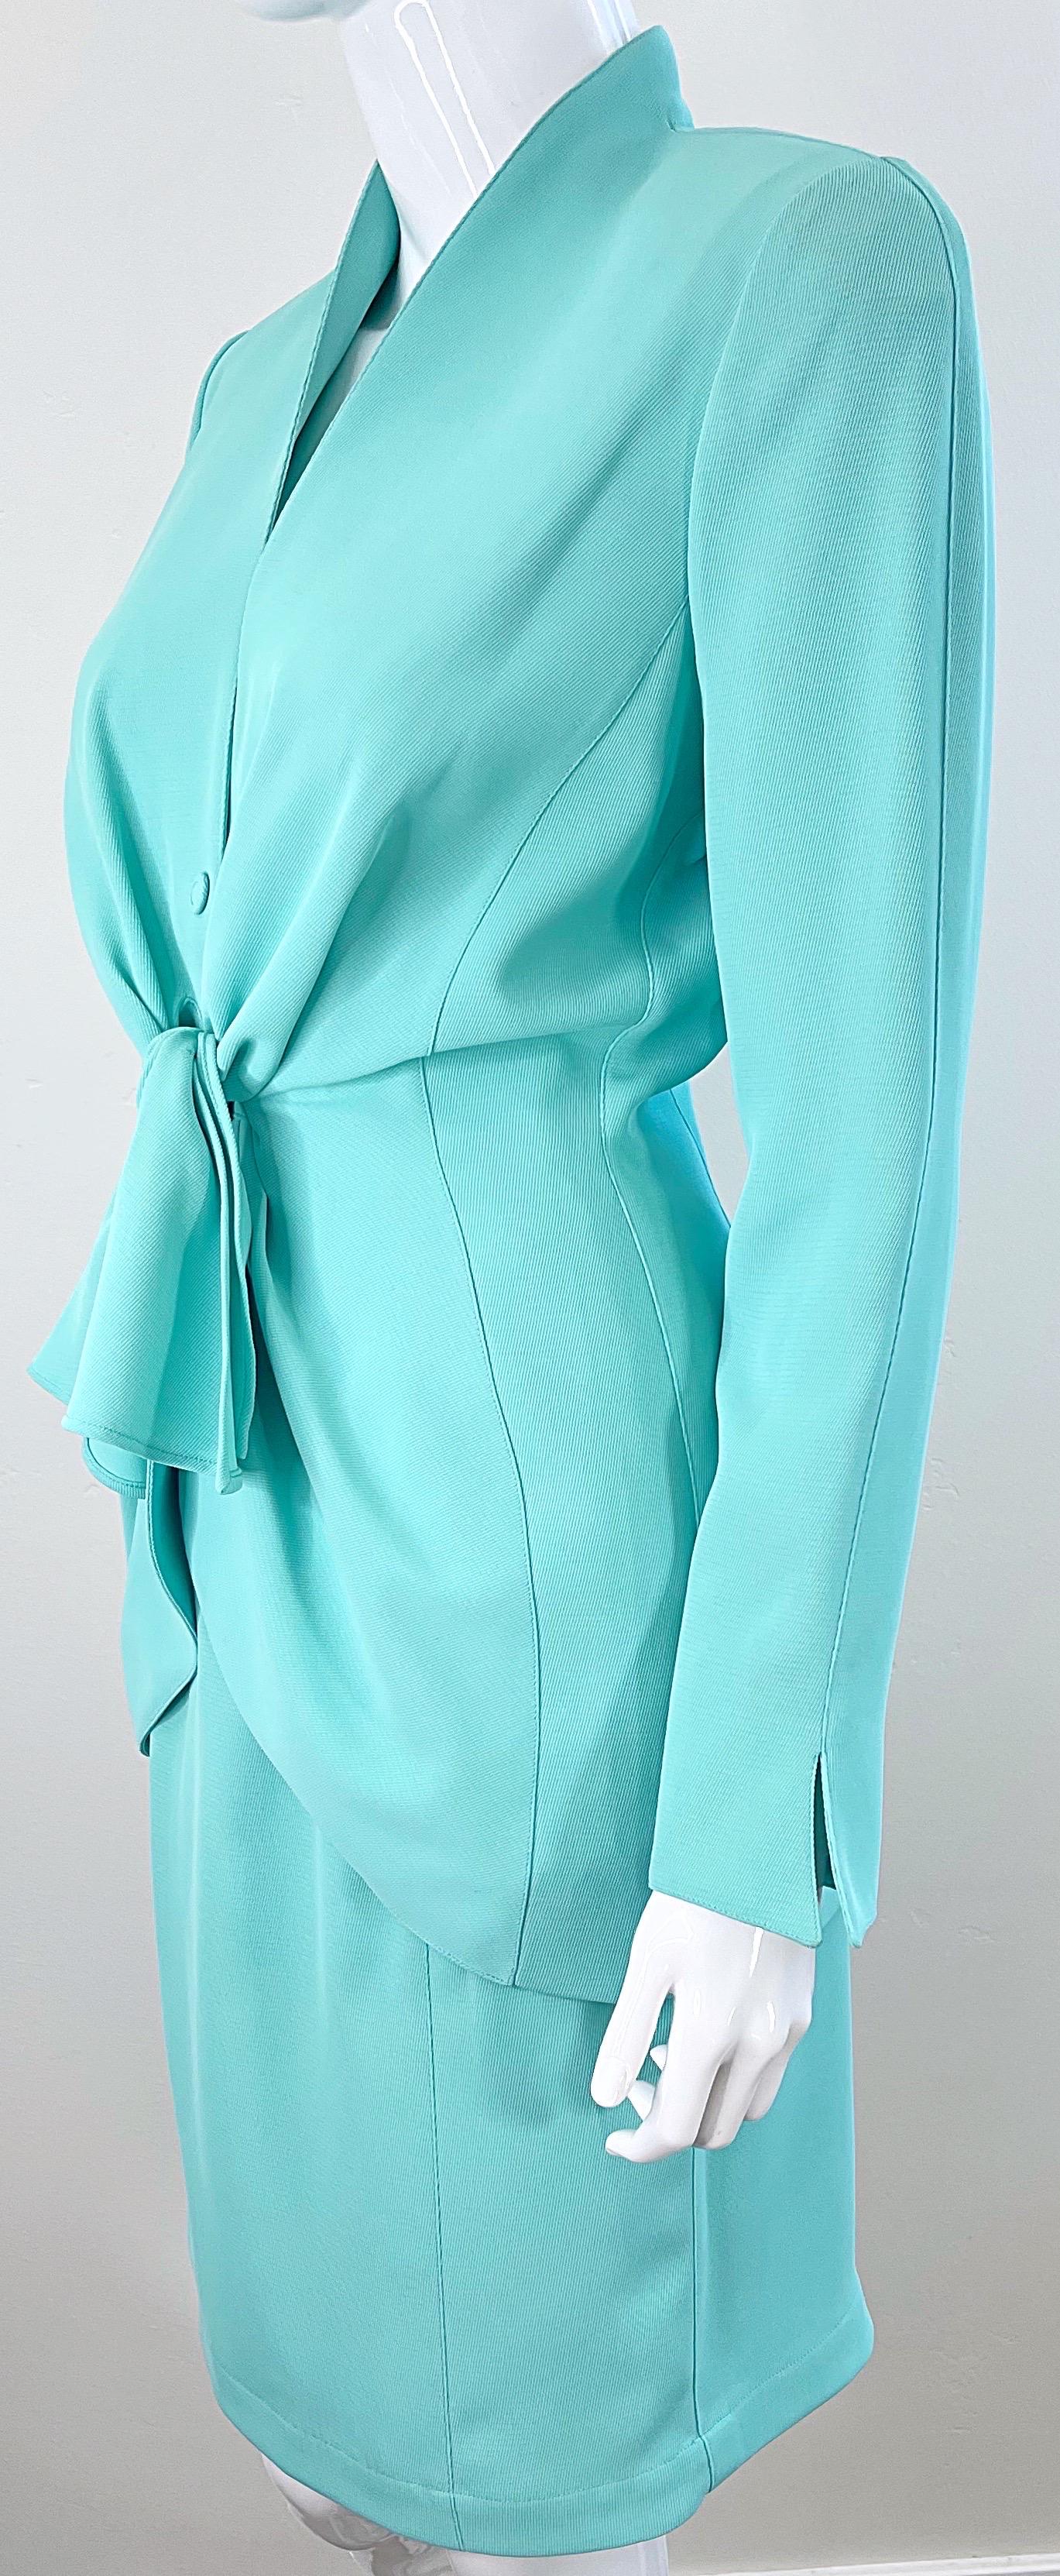 NWT Vintage Thierry Mugler F/W 1988 Mint Blue Size 38 1980s Skirt Suit For Sale 4